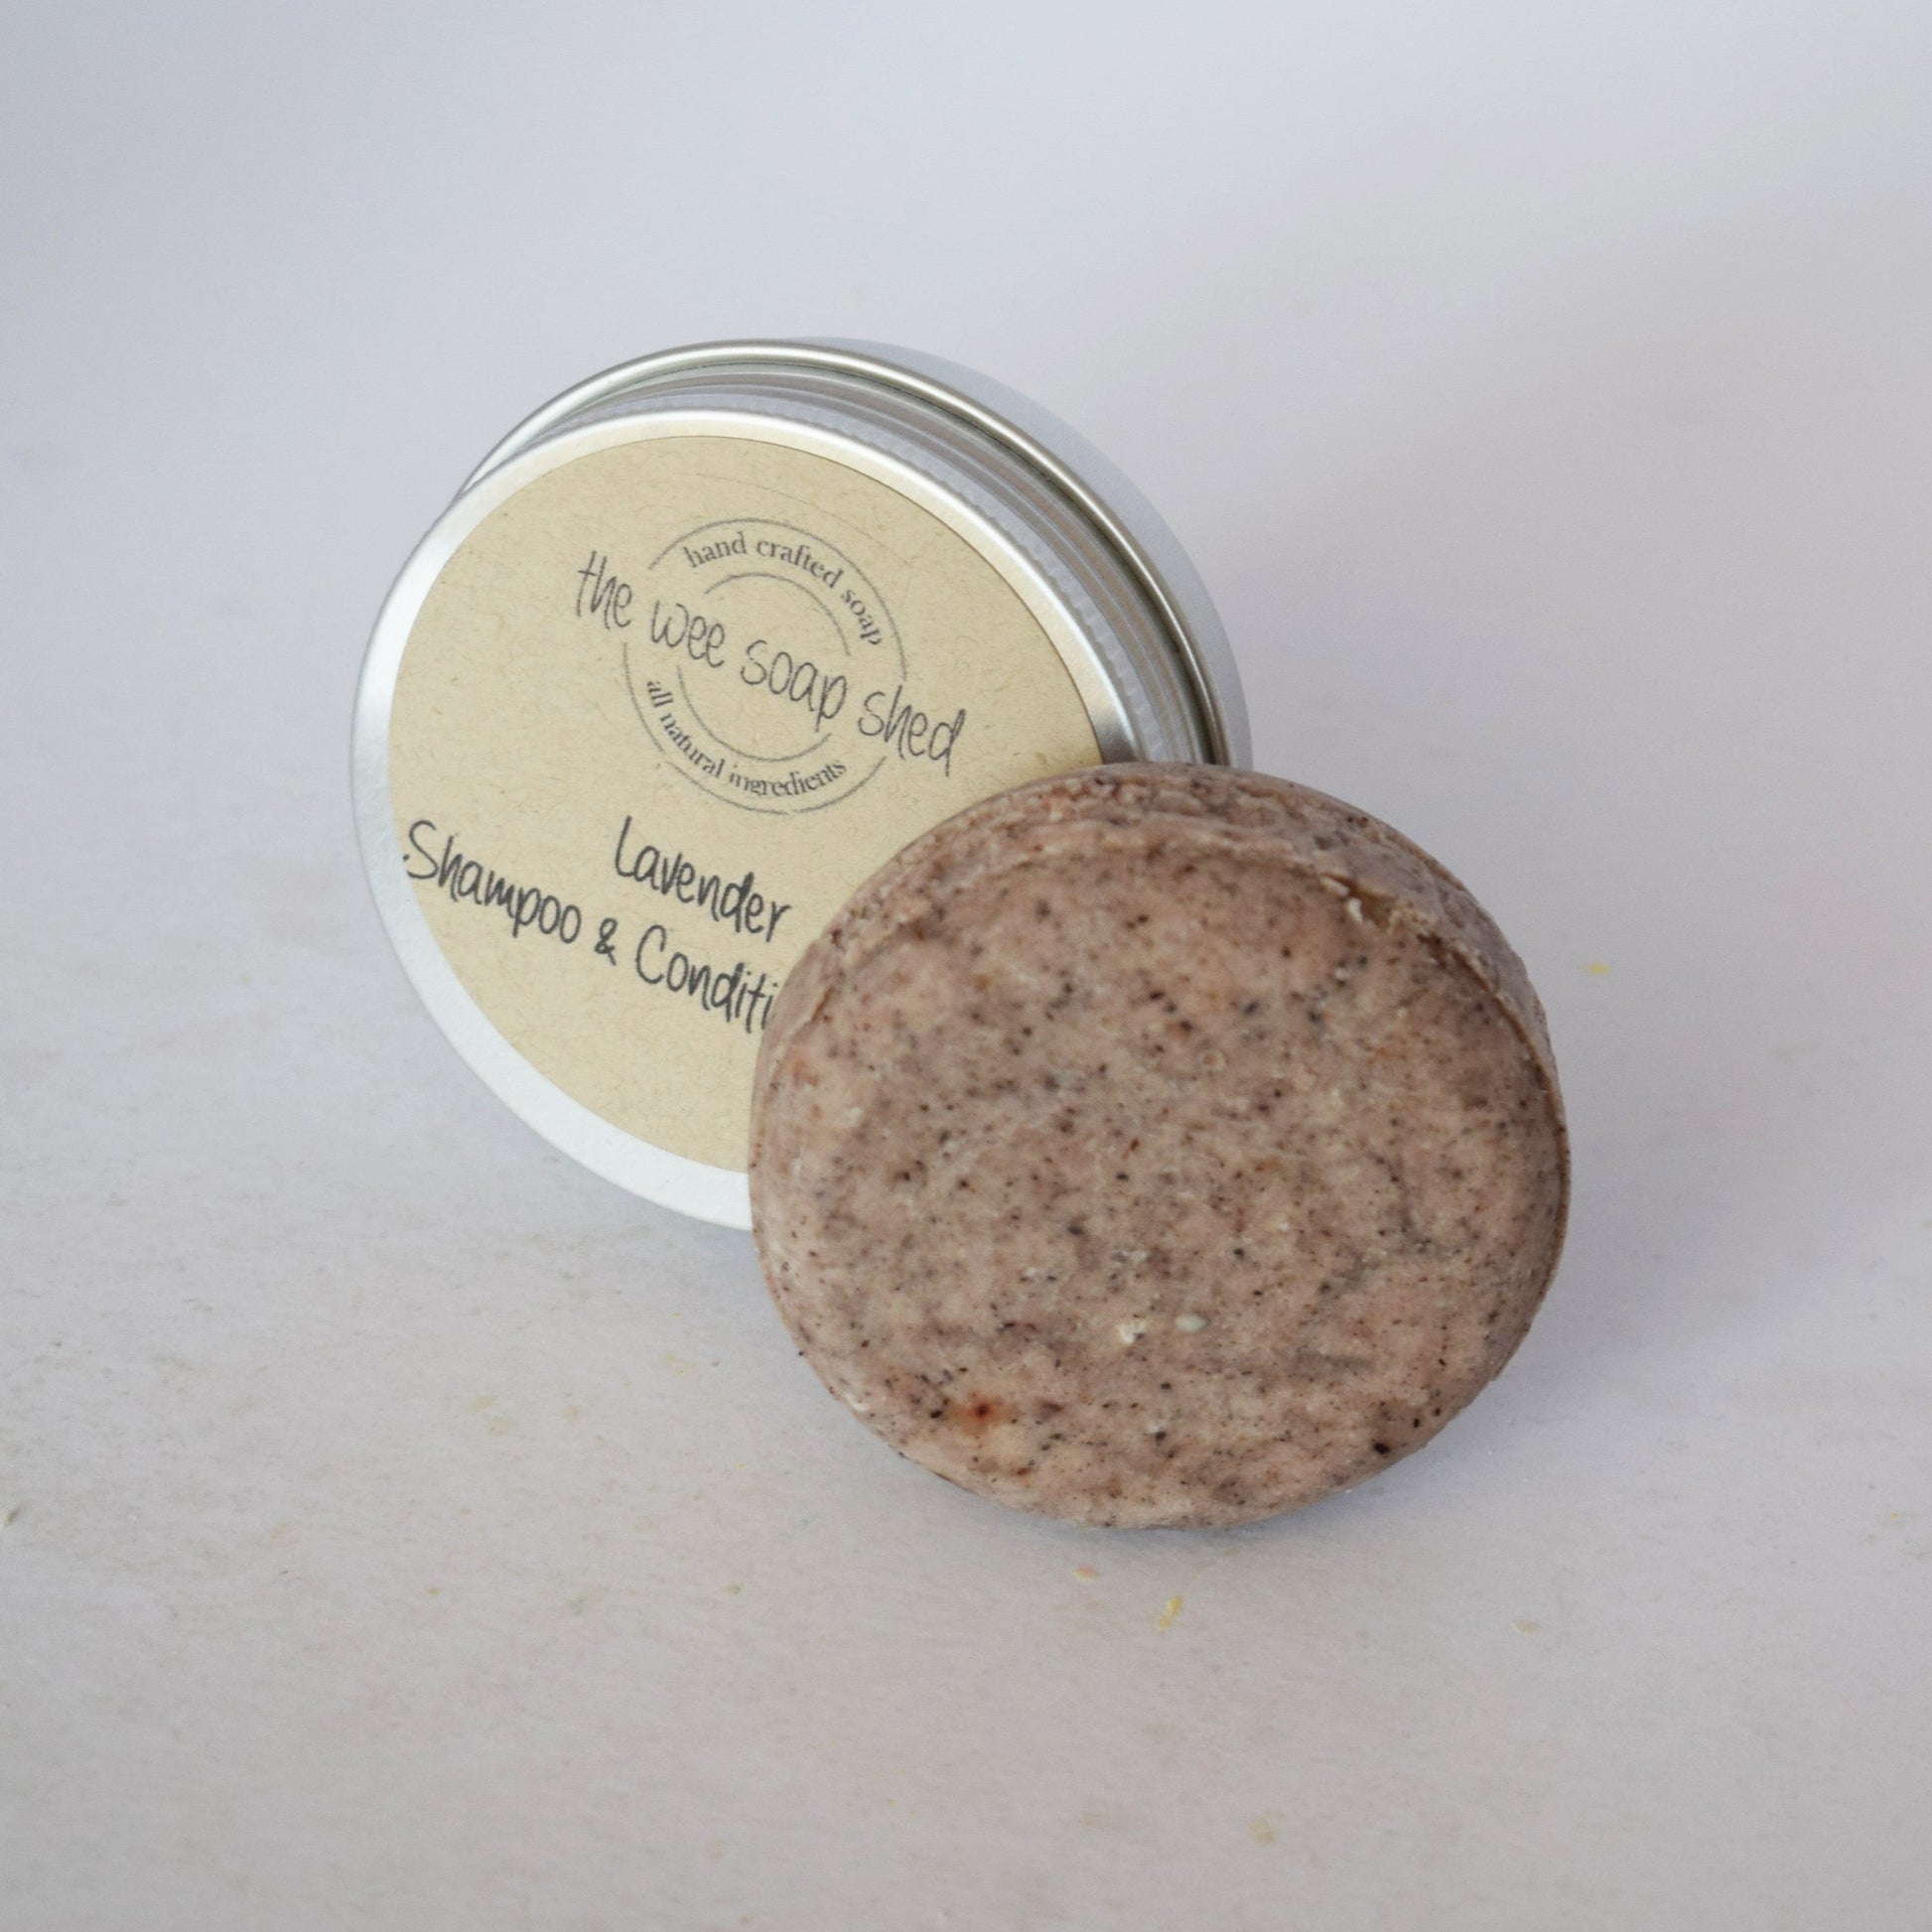 The Wee Soap Shed Lavender Shampoo & Conditioner Bar